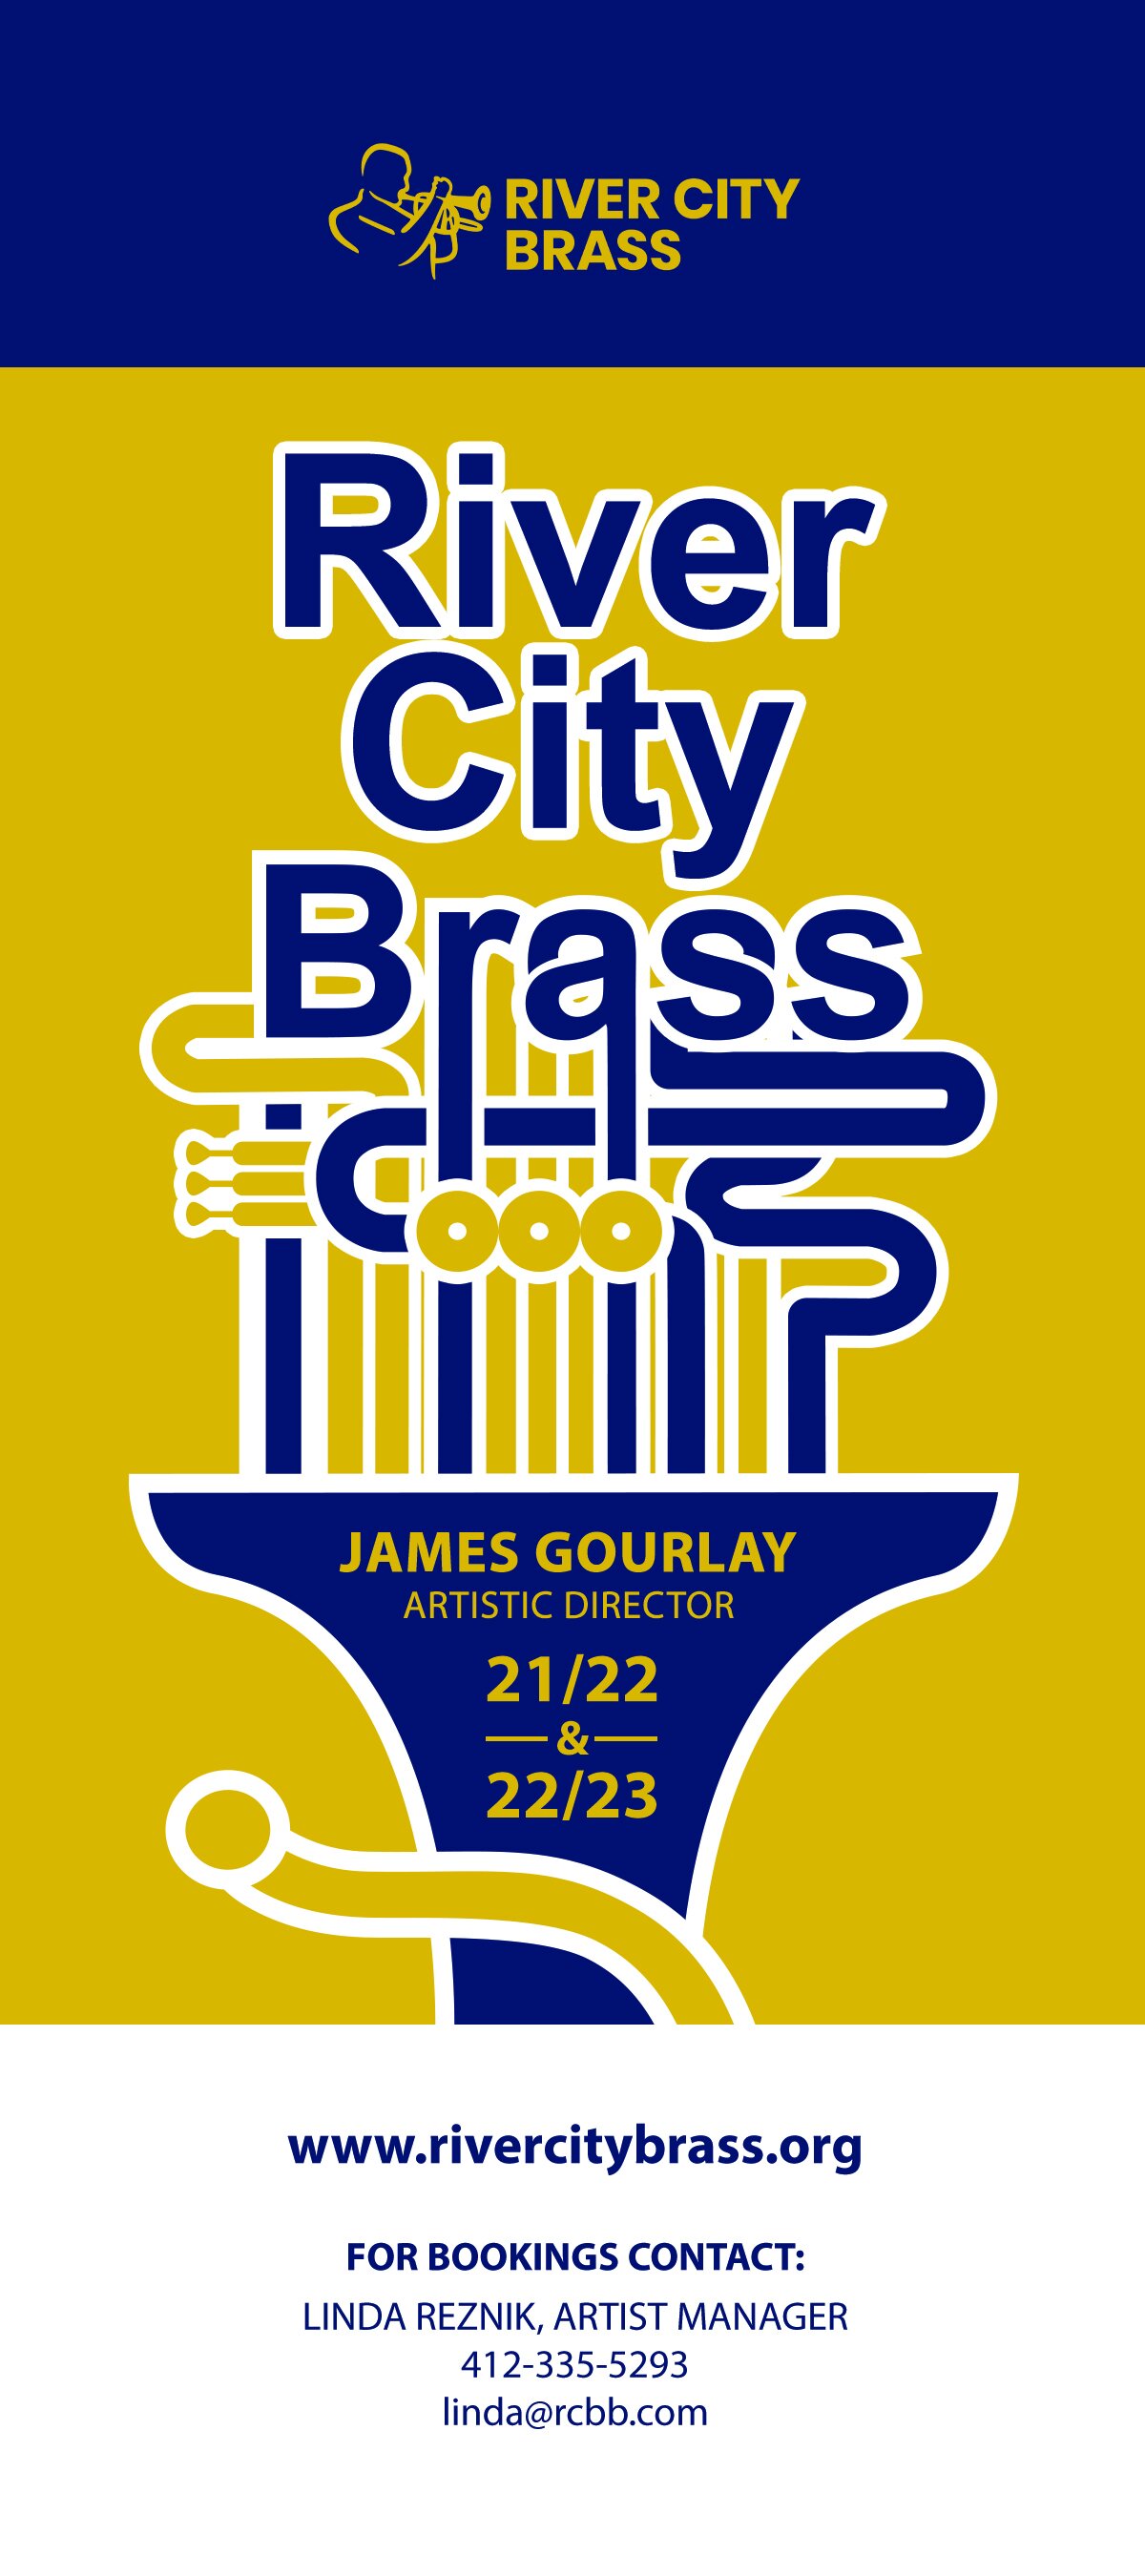 Personnel — River City Brass